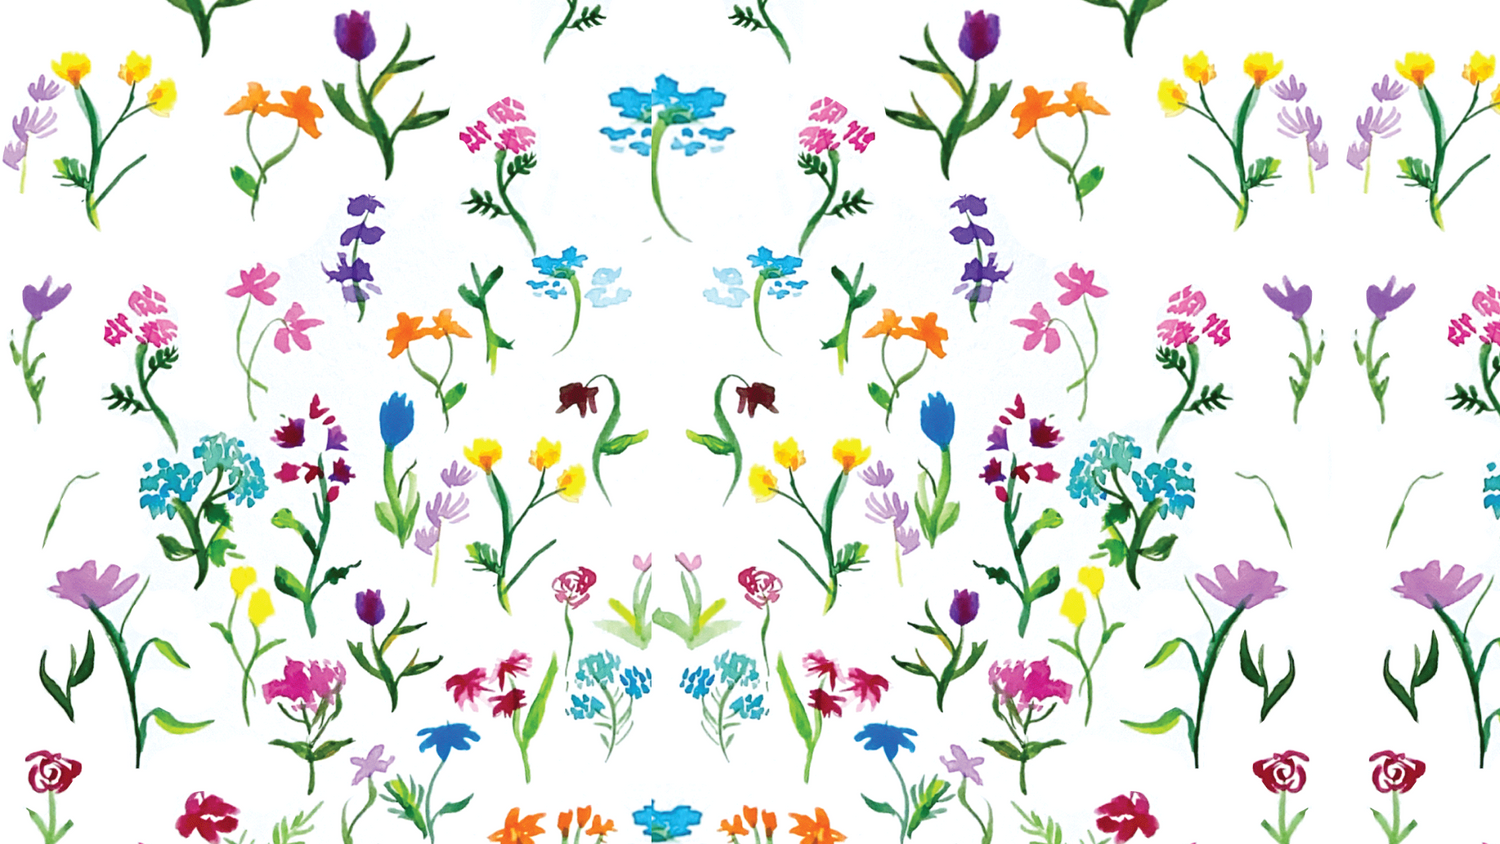 watercolor hand painted wild flowers